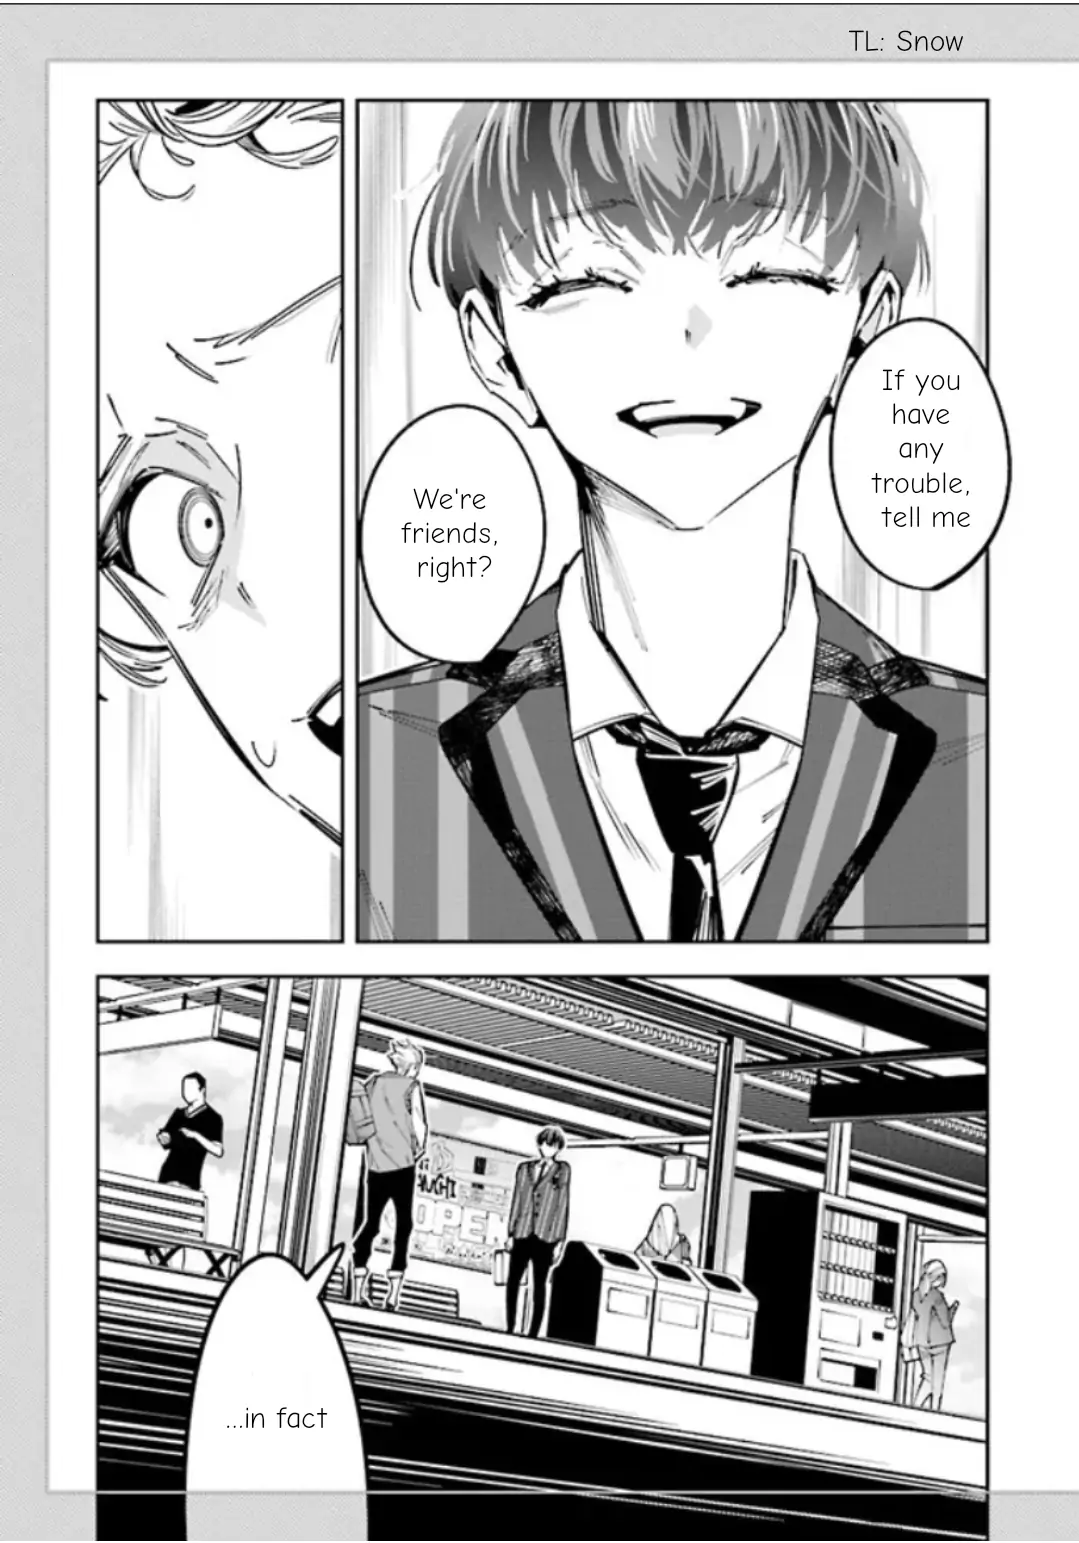 I Reincarnated As The Little Sister Of A Death Game Manga's Murder Mastermind And Failed chapter 11 - page 17